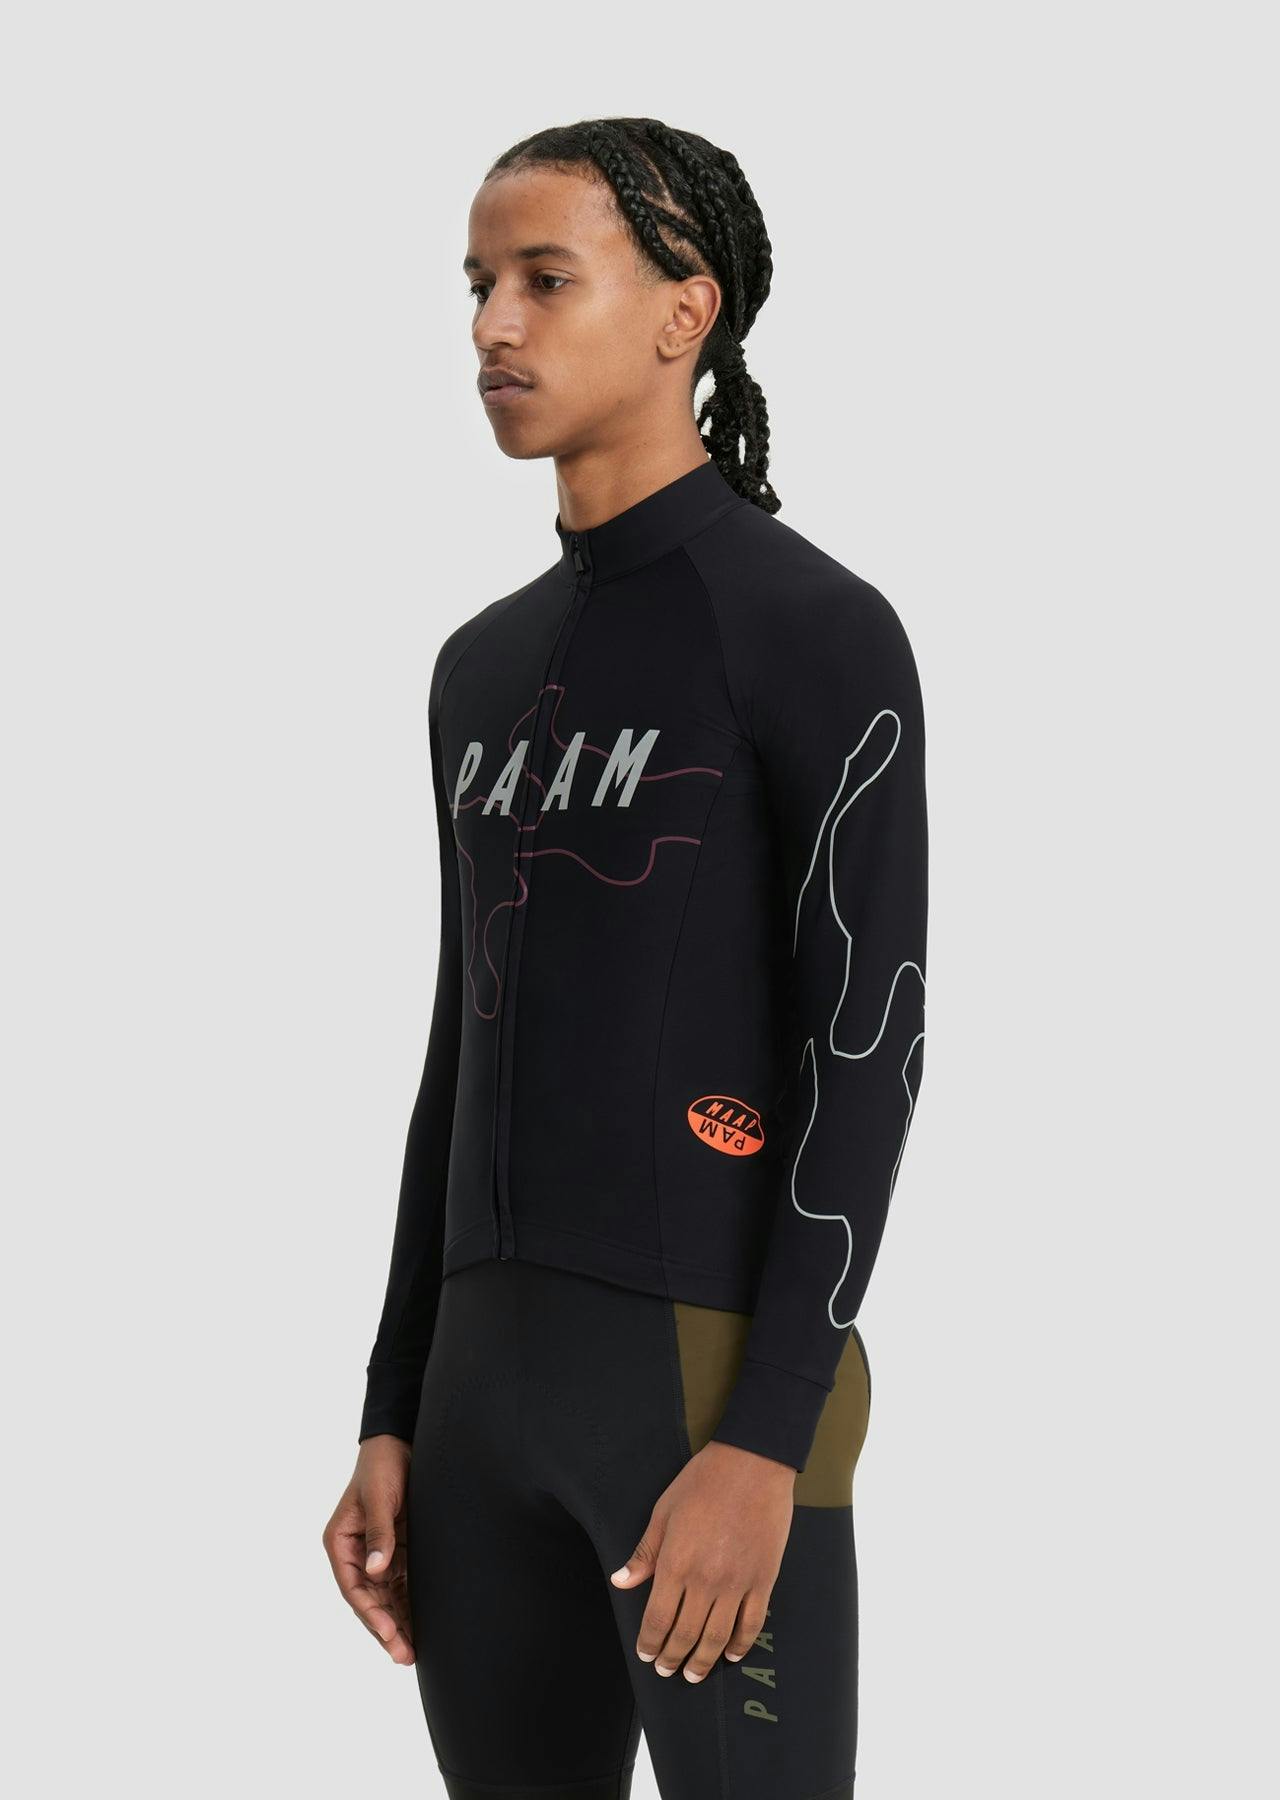 MAAP X PAM Thermal LS Jersey